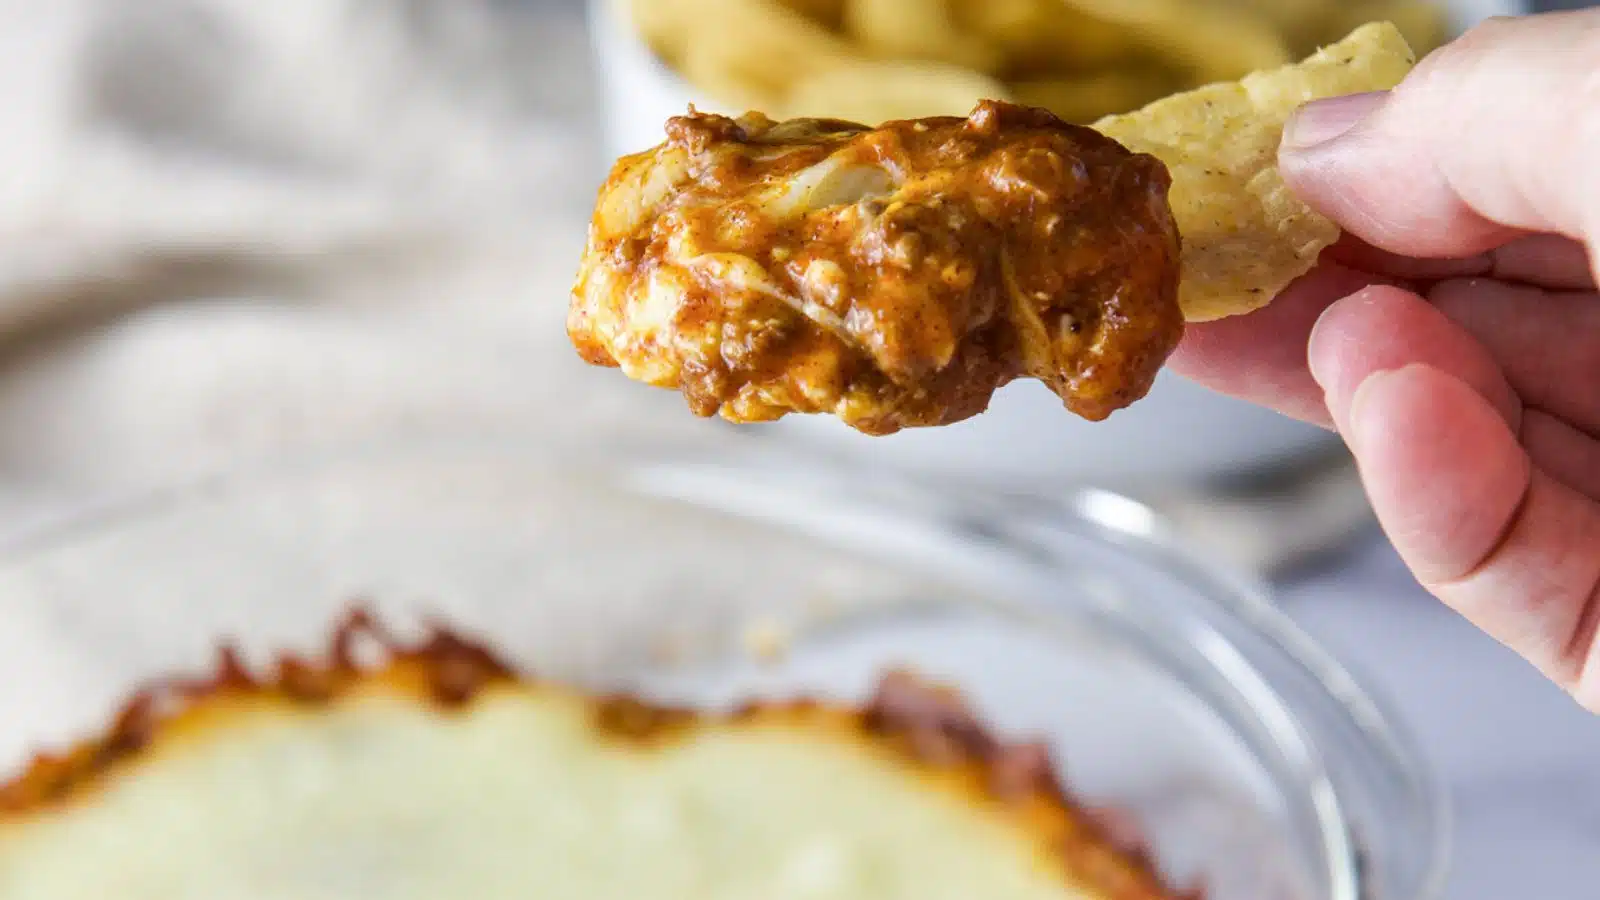 A hand holding a chip dipped in the chili dip